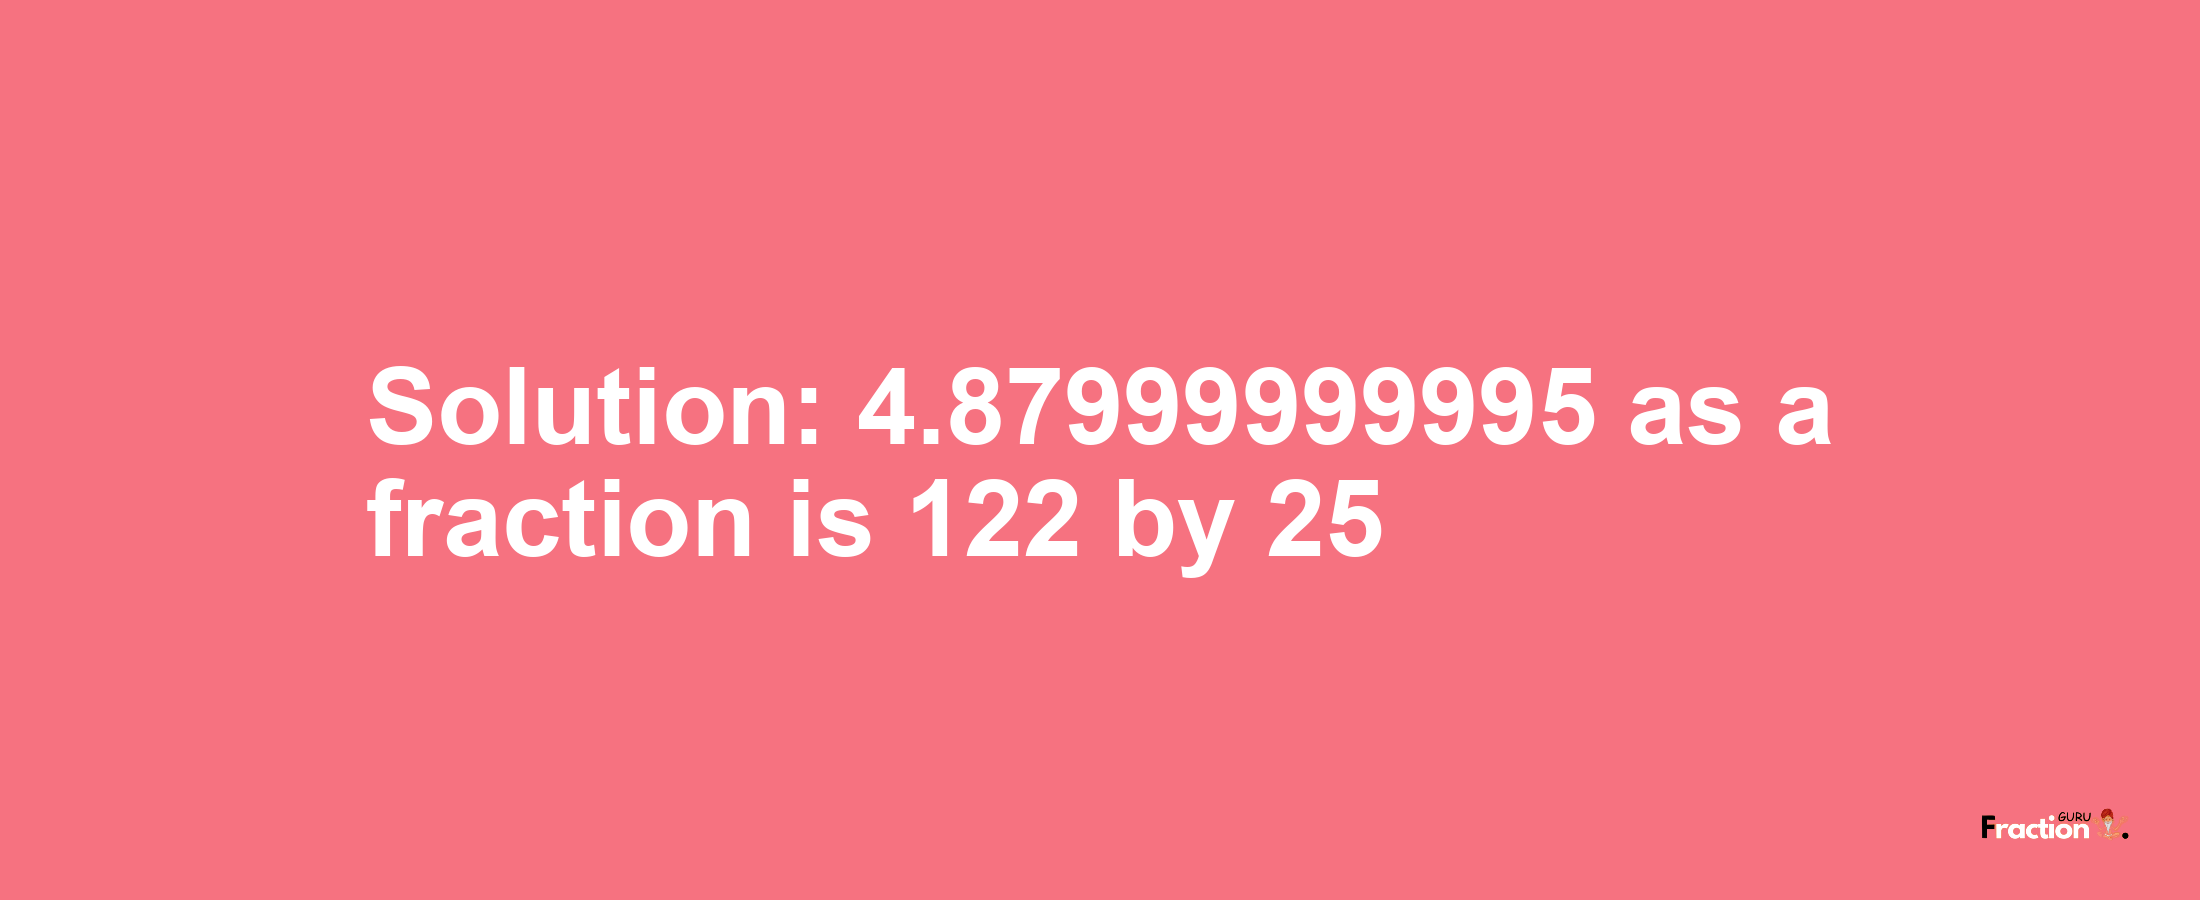 Solution:4.87999999995 as a fraction is 122/25